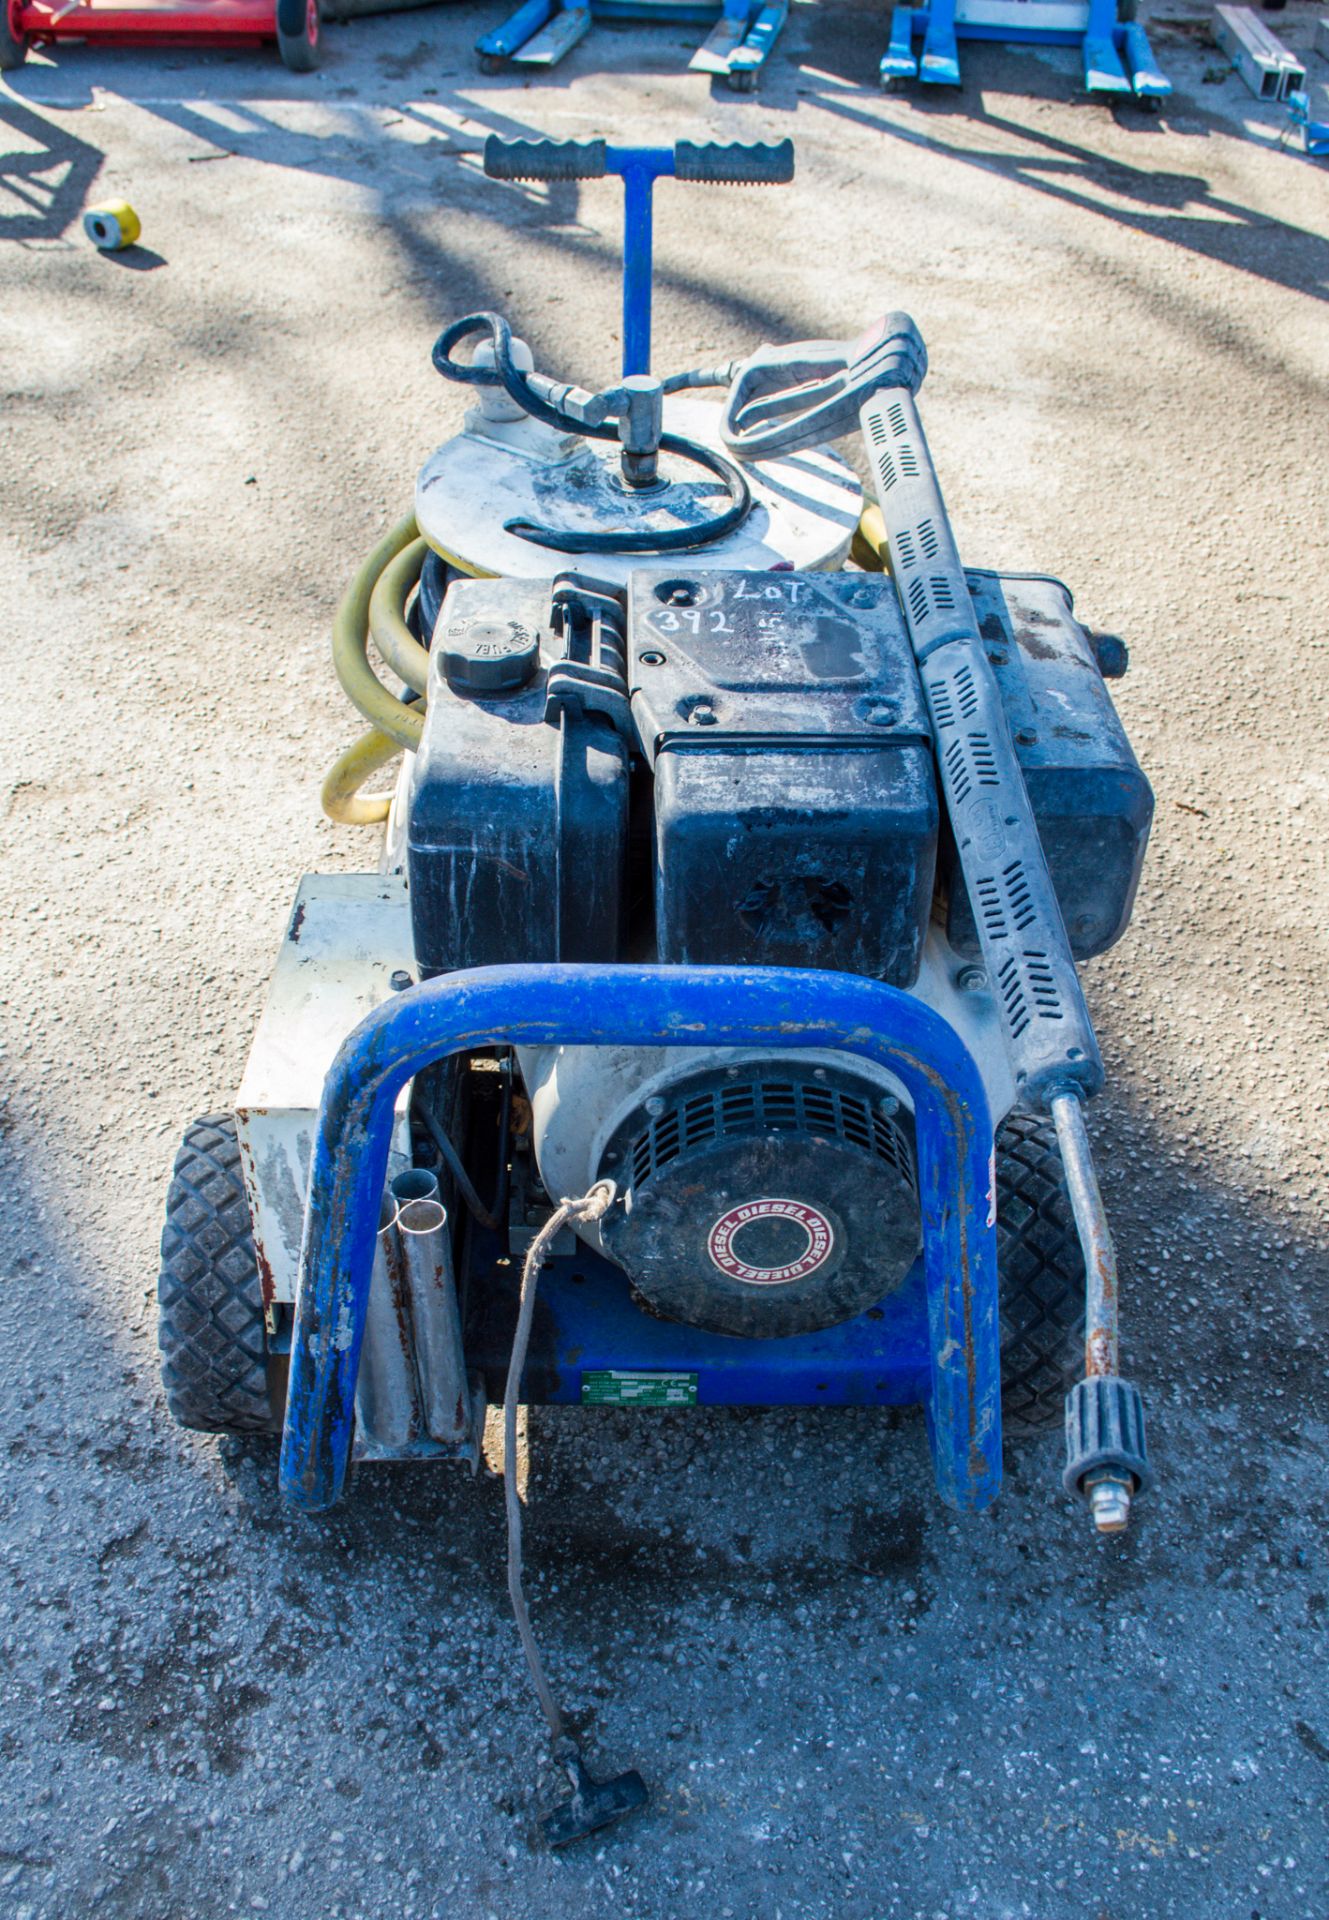 Brendon diesel driven pressure washer A663151 - Image 2 of 2